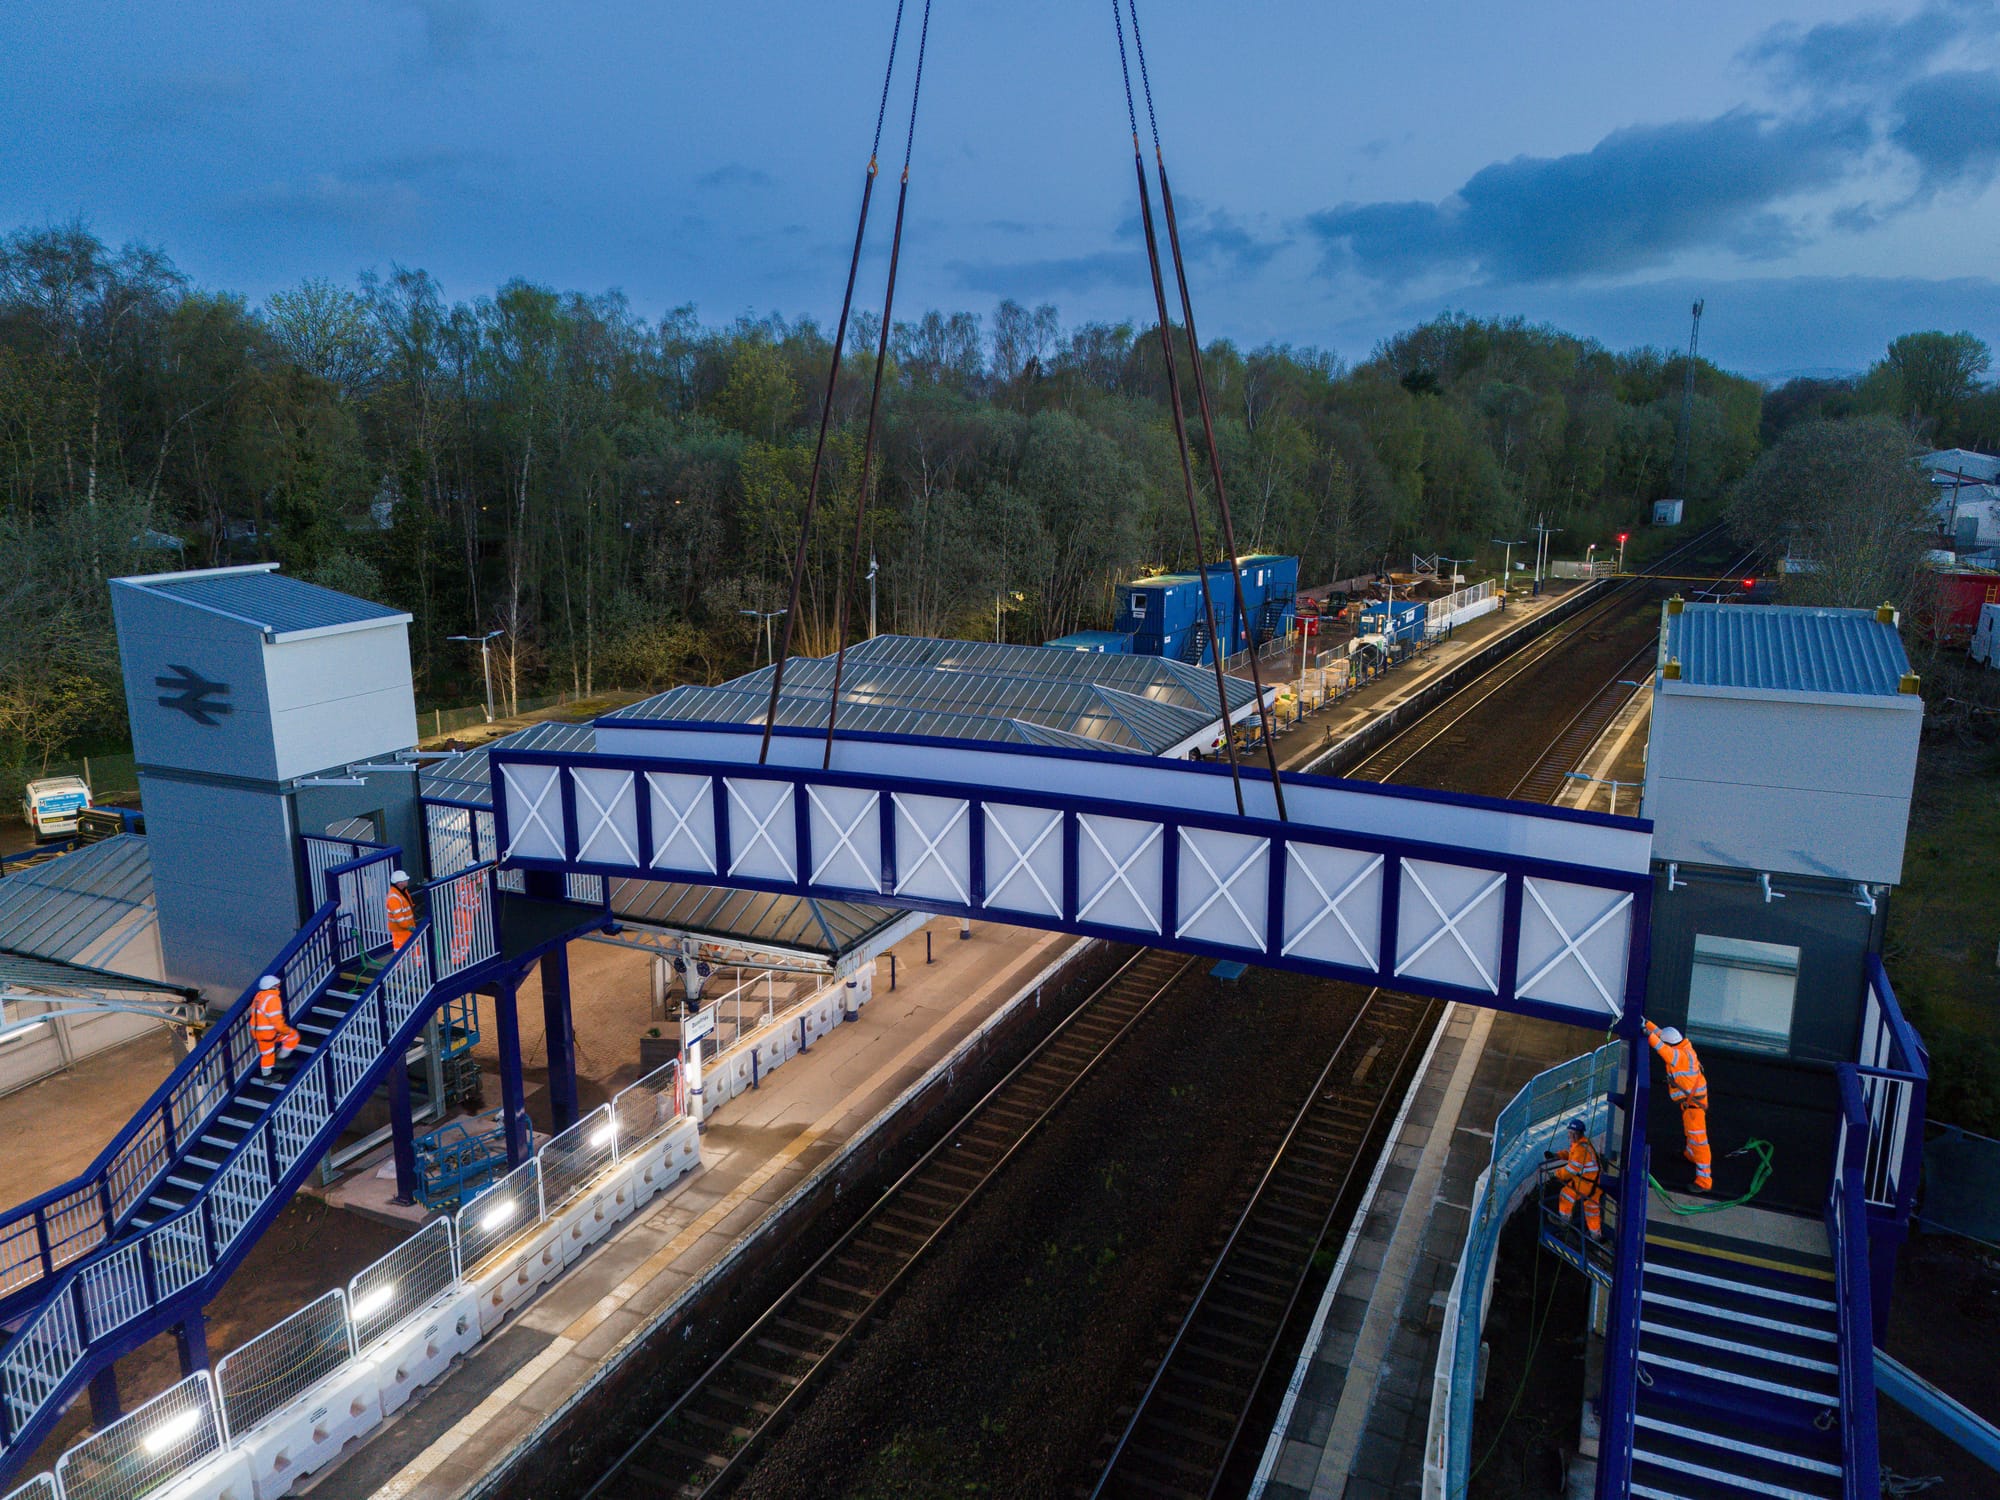 New Footbridge, Lifts Installed at Dumfries Station